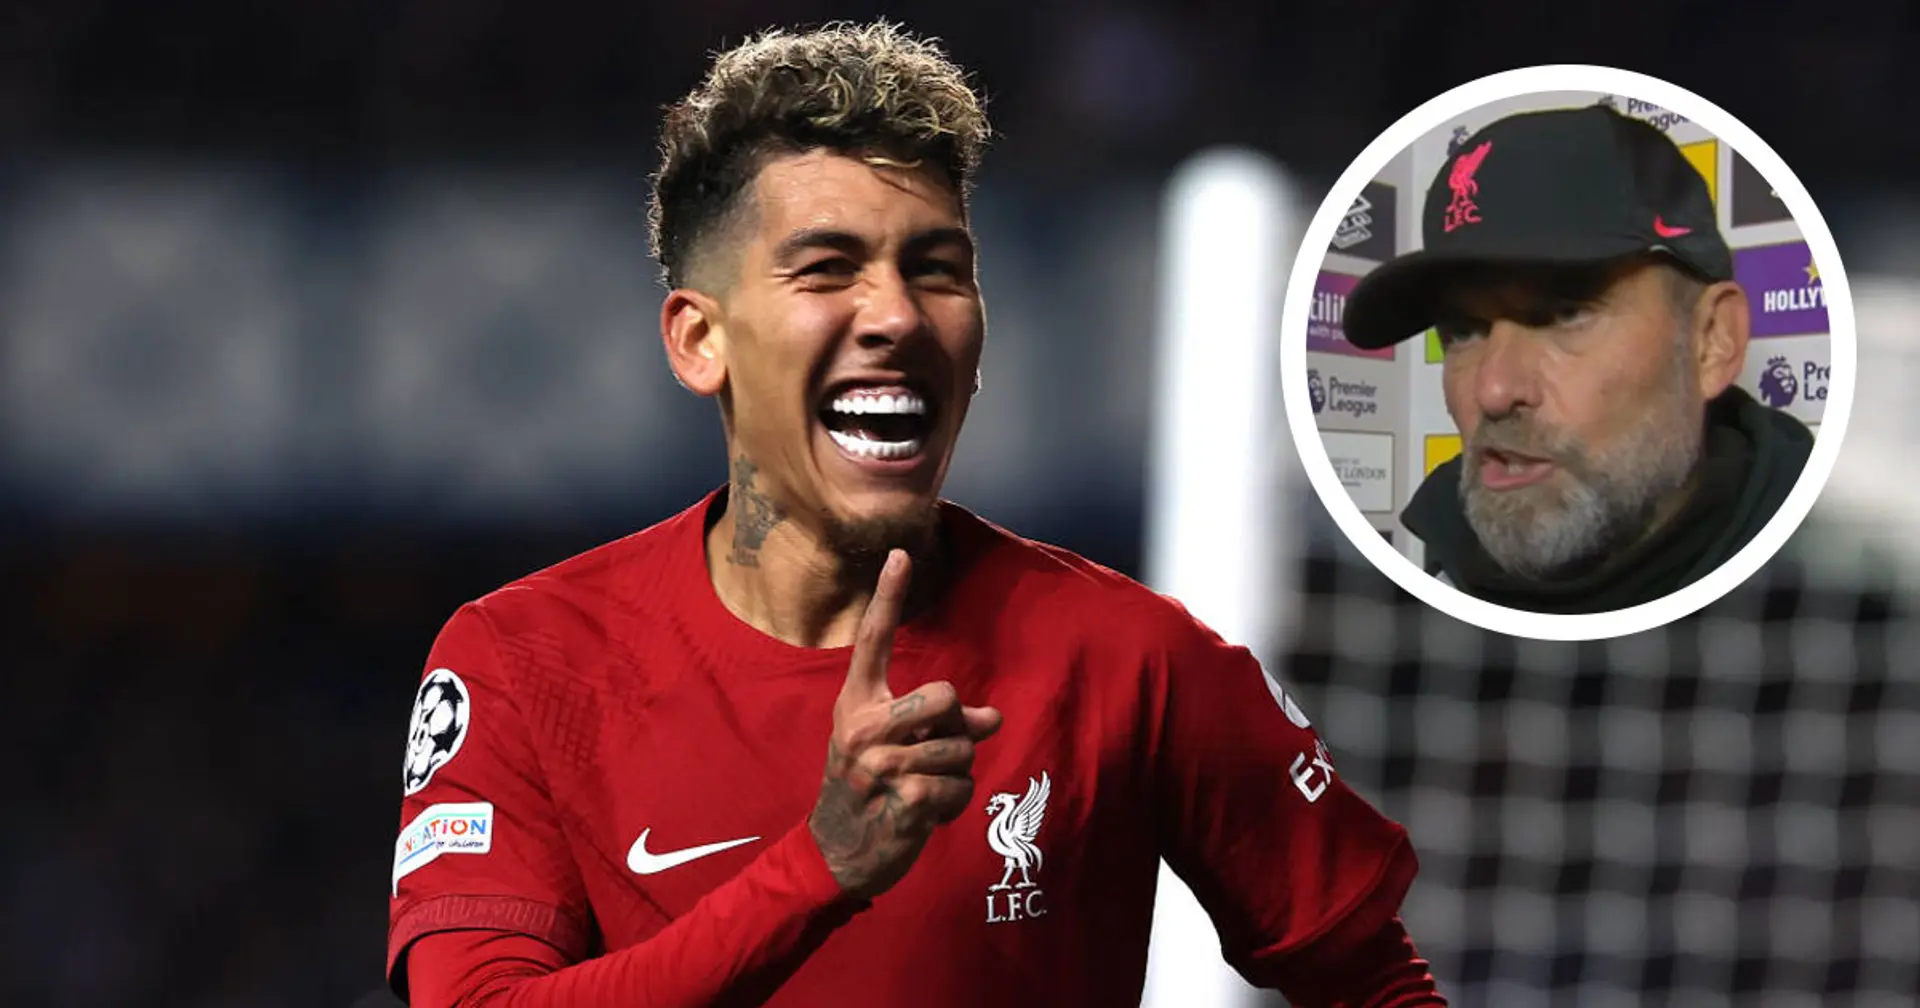 Klopp: I want Firmino to stay at Liverpool beyond the summer